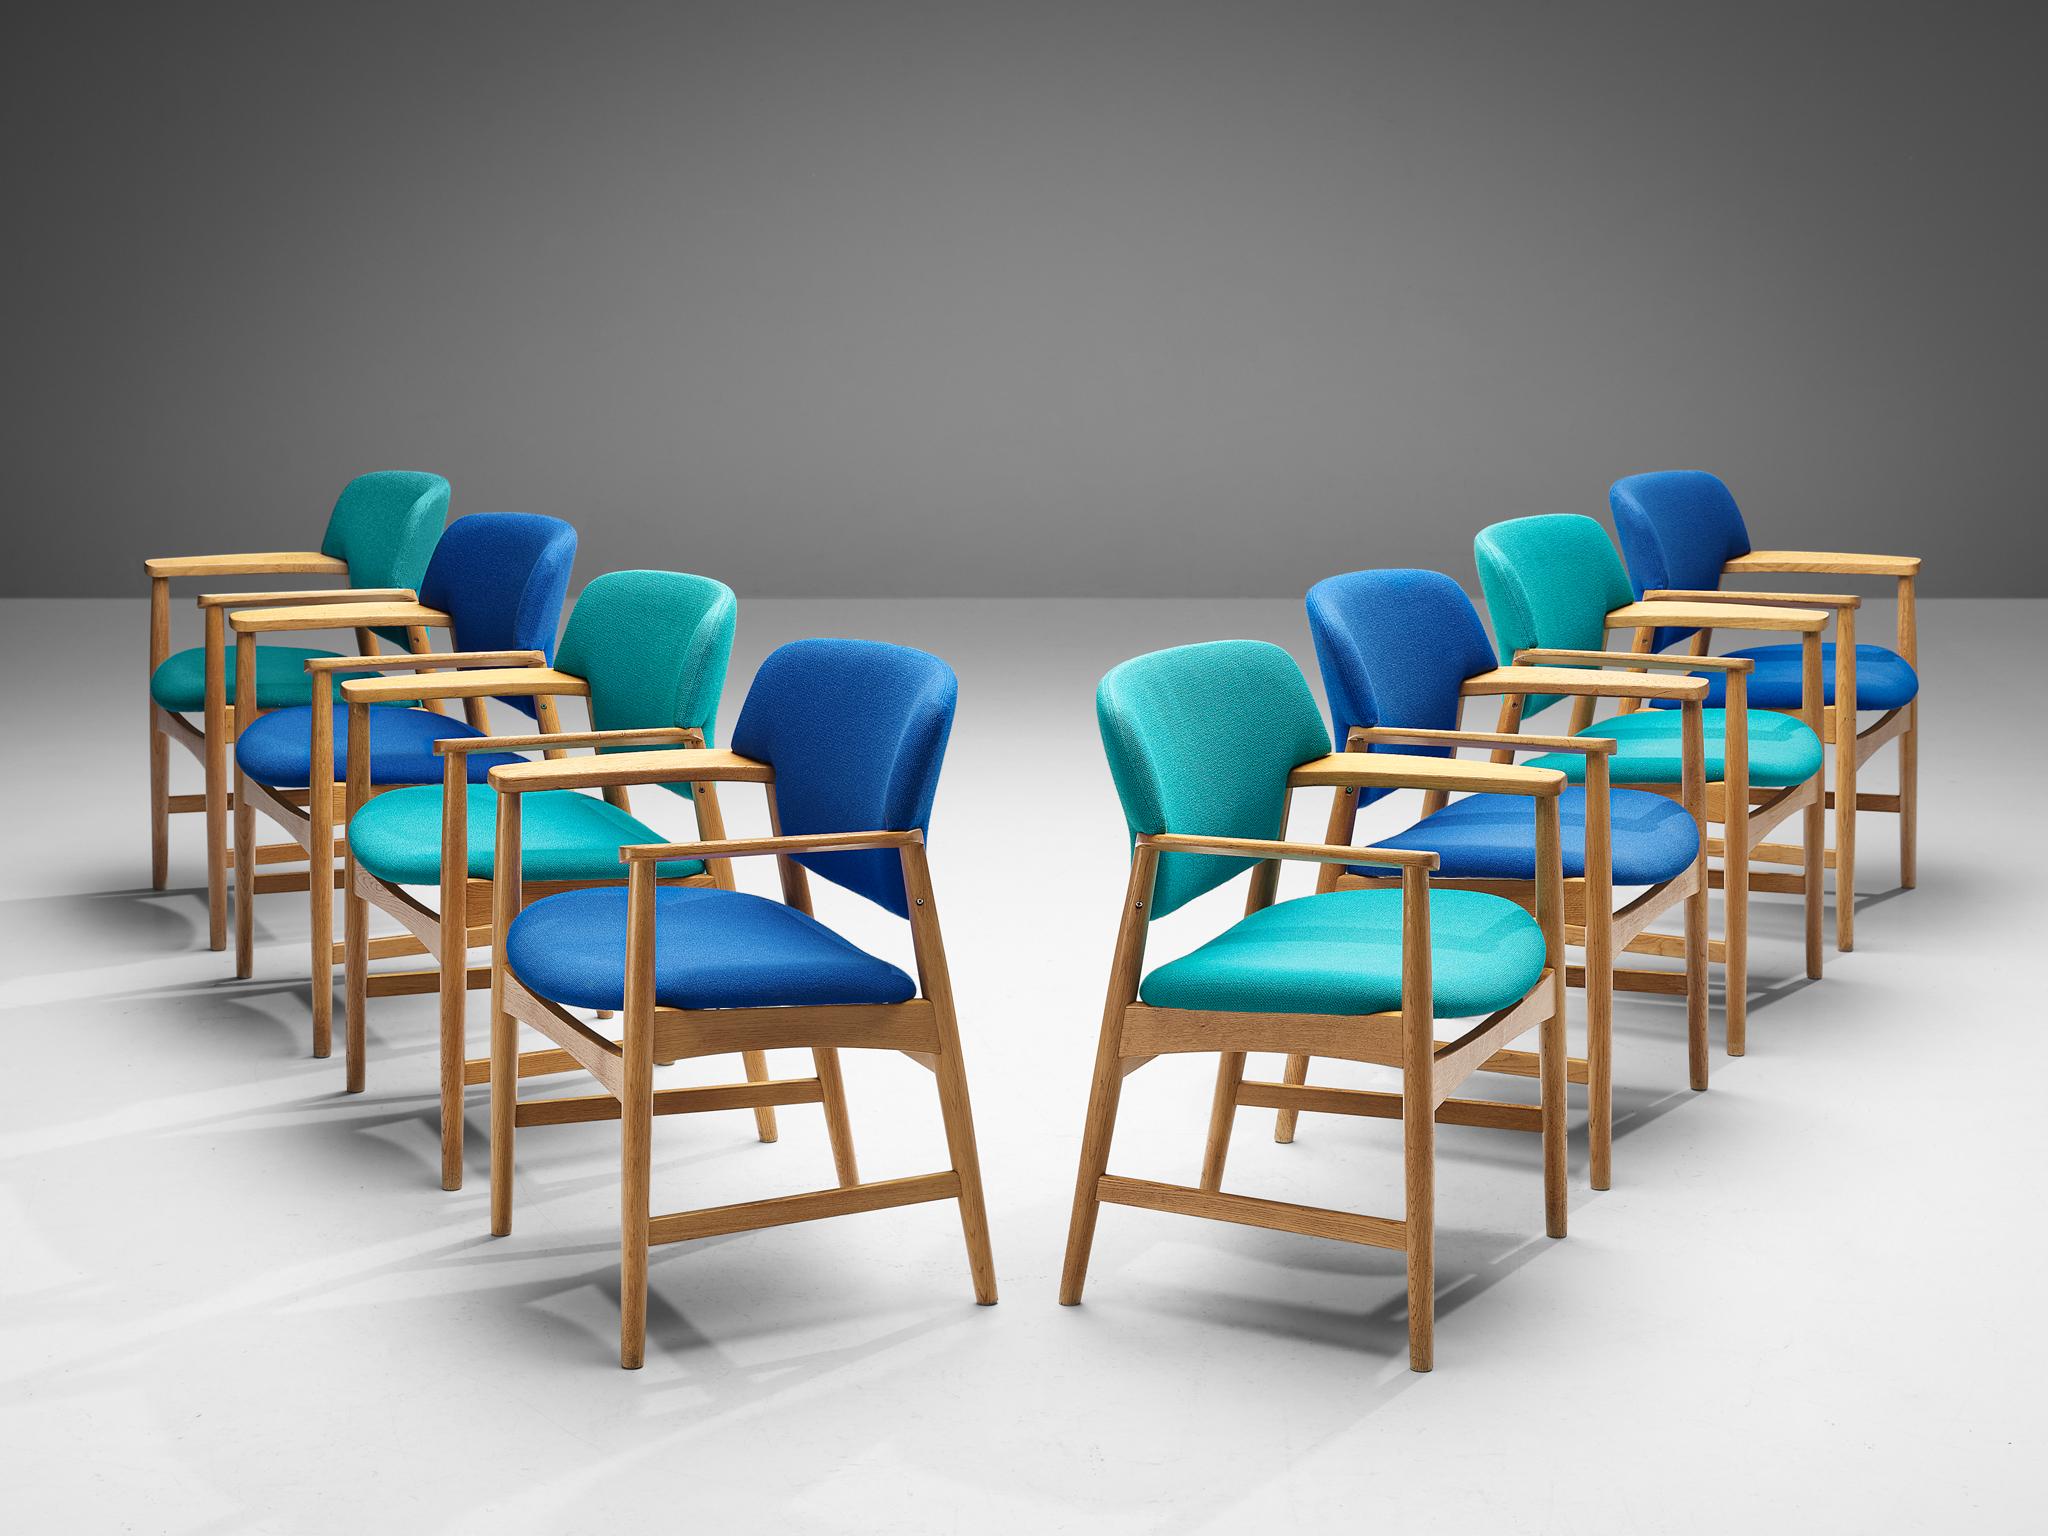 Einar Larsen & Aksel Bender-Madsen for Fritz Hansen, set of eight armchairs, model 4205, blue and turquoise upholstery, oak, Denmark, 1950s

These sculpted dining chairs are executed with a rounded back. The chairs feature a blond oak frame that